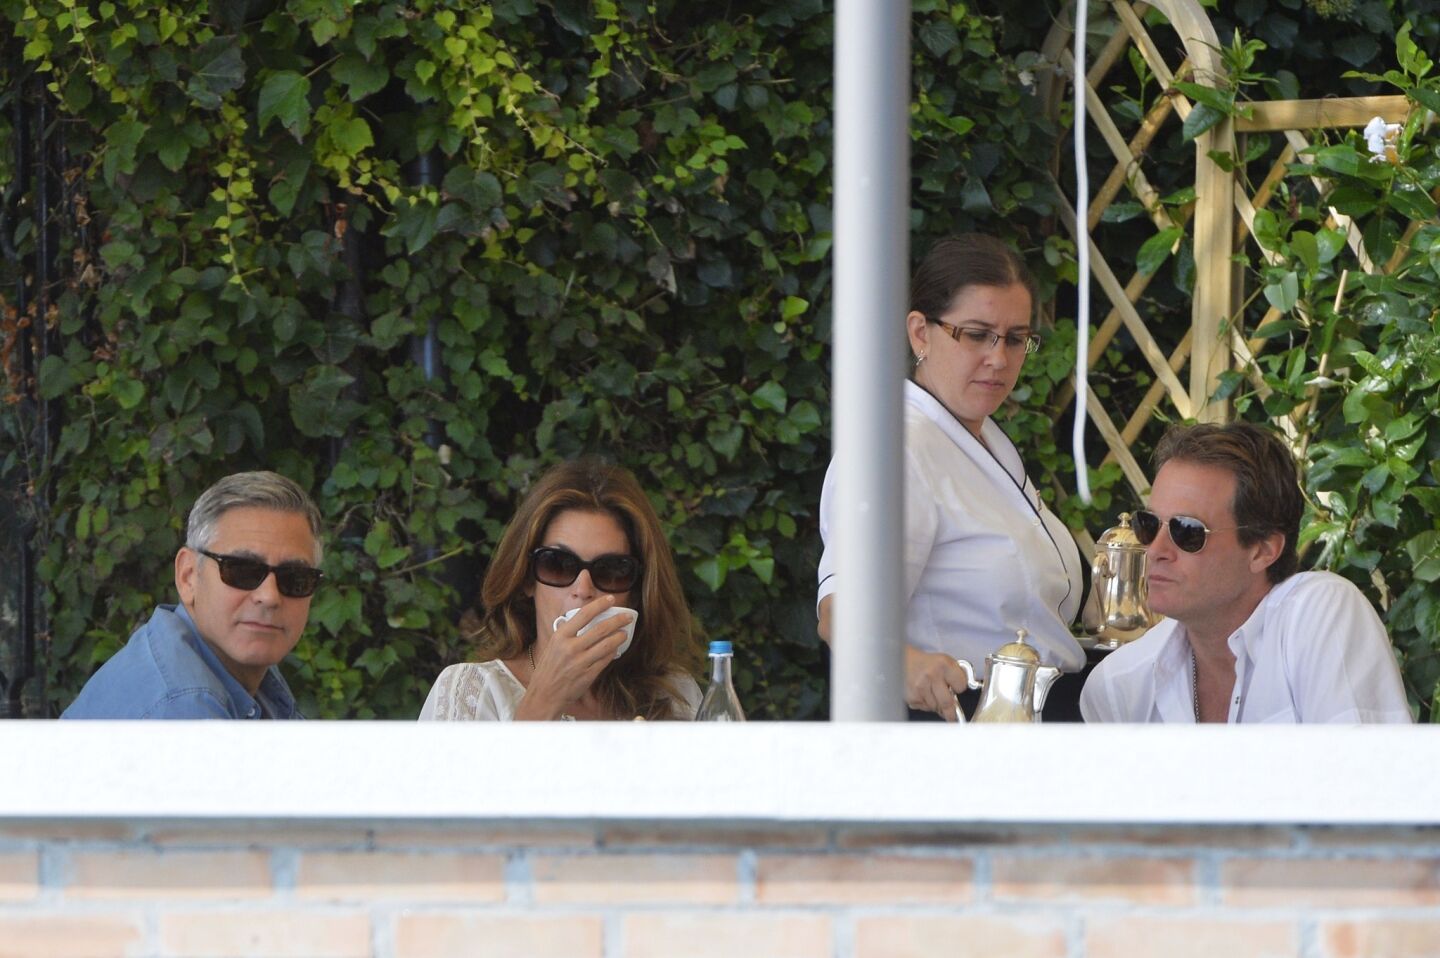 Groom George Clooney dines with supermodel pal Cindy Crawford and business partner Rande Gerber, her husband, at the Cipriani Hotel in Venice on Saturday before his wedding to Amal Alamuddin.